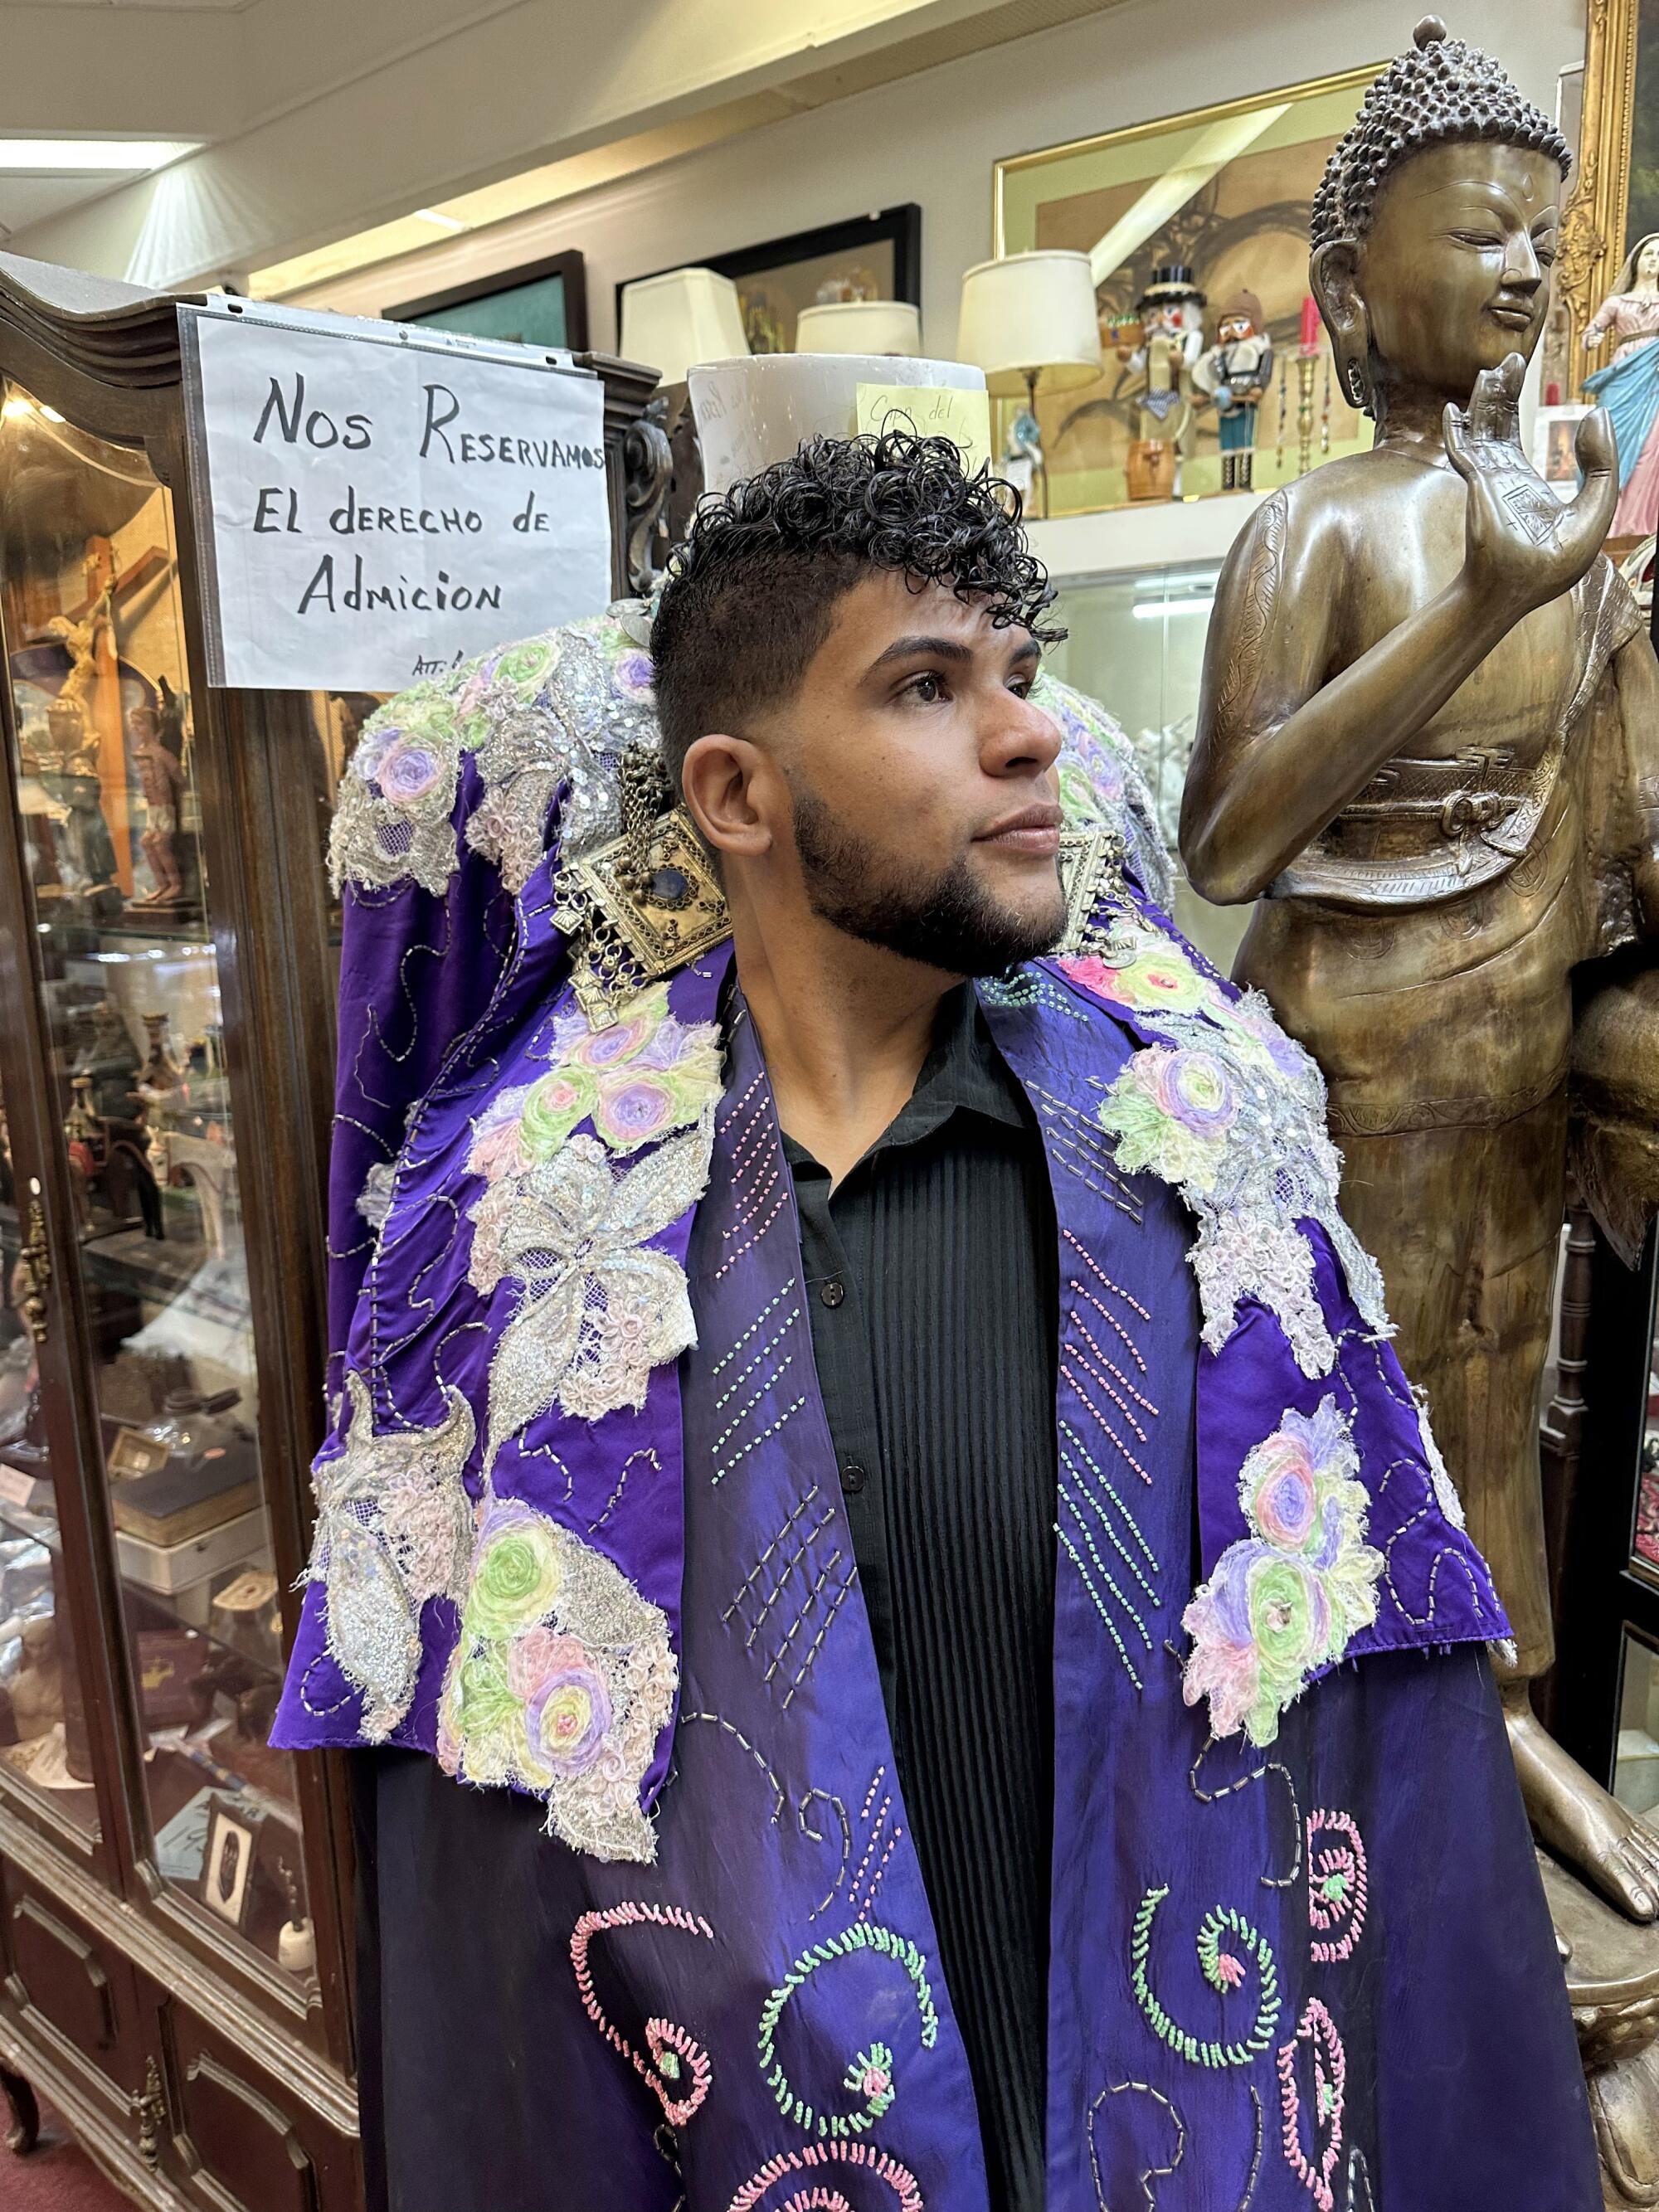 A man tries on a cape in a shop.